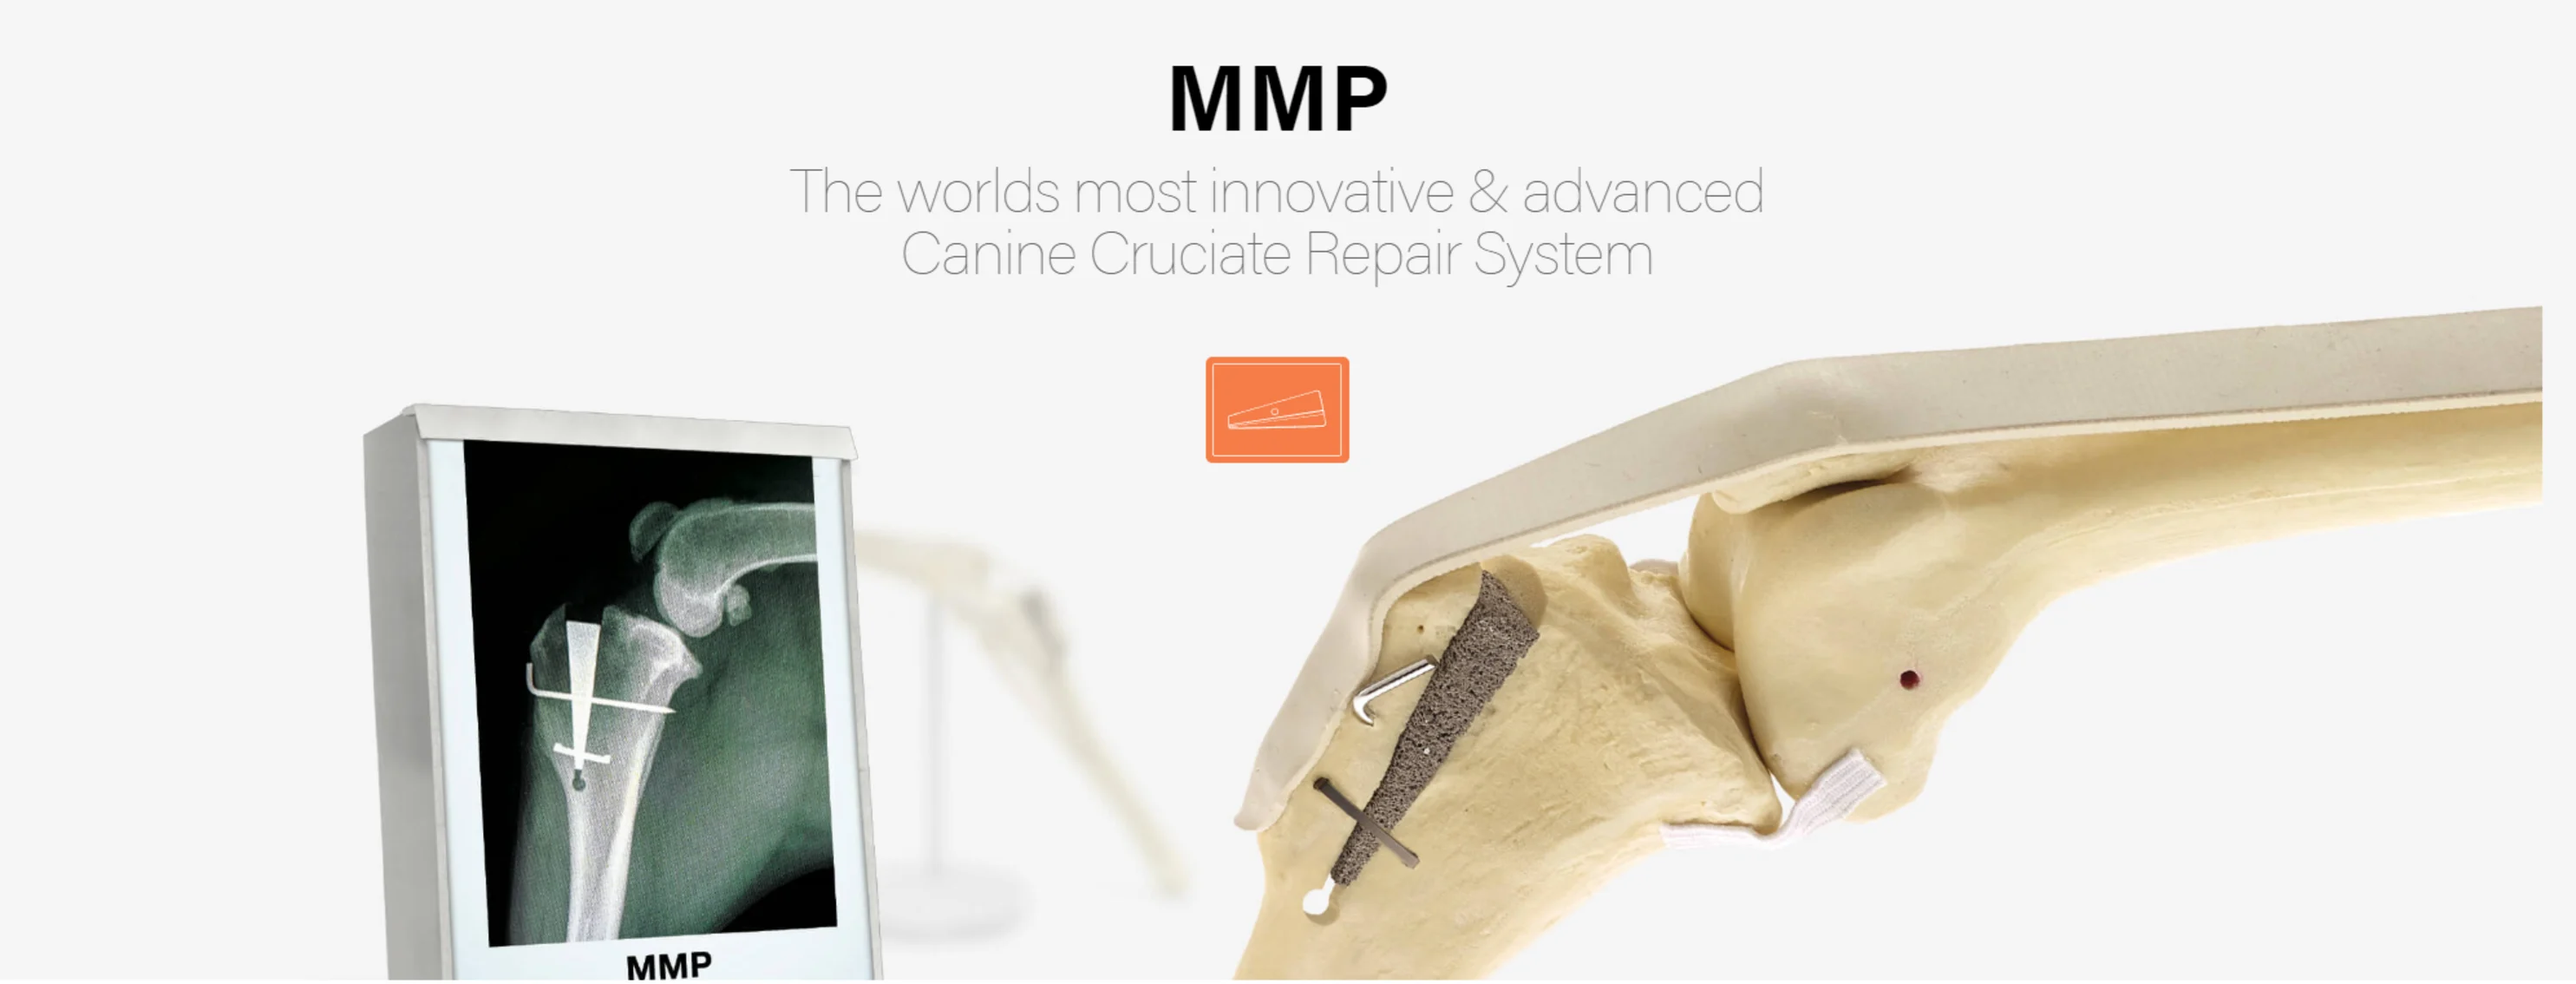 MMP - The worlds most innovative and advanced Canine Cruciate Repair System.